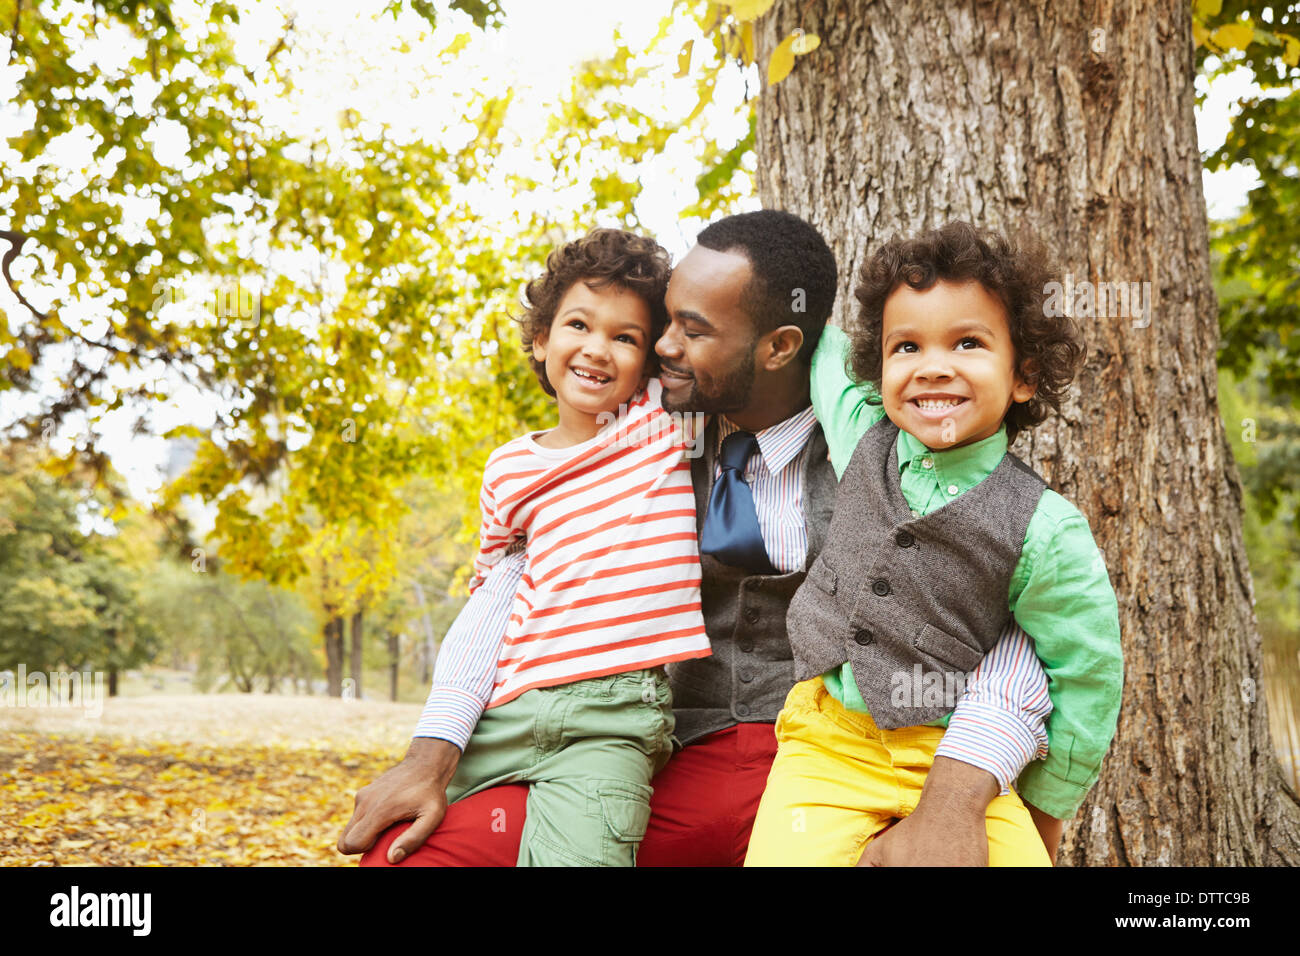 Father and sons smiling in park Stock Photo